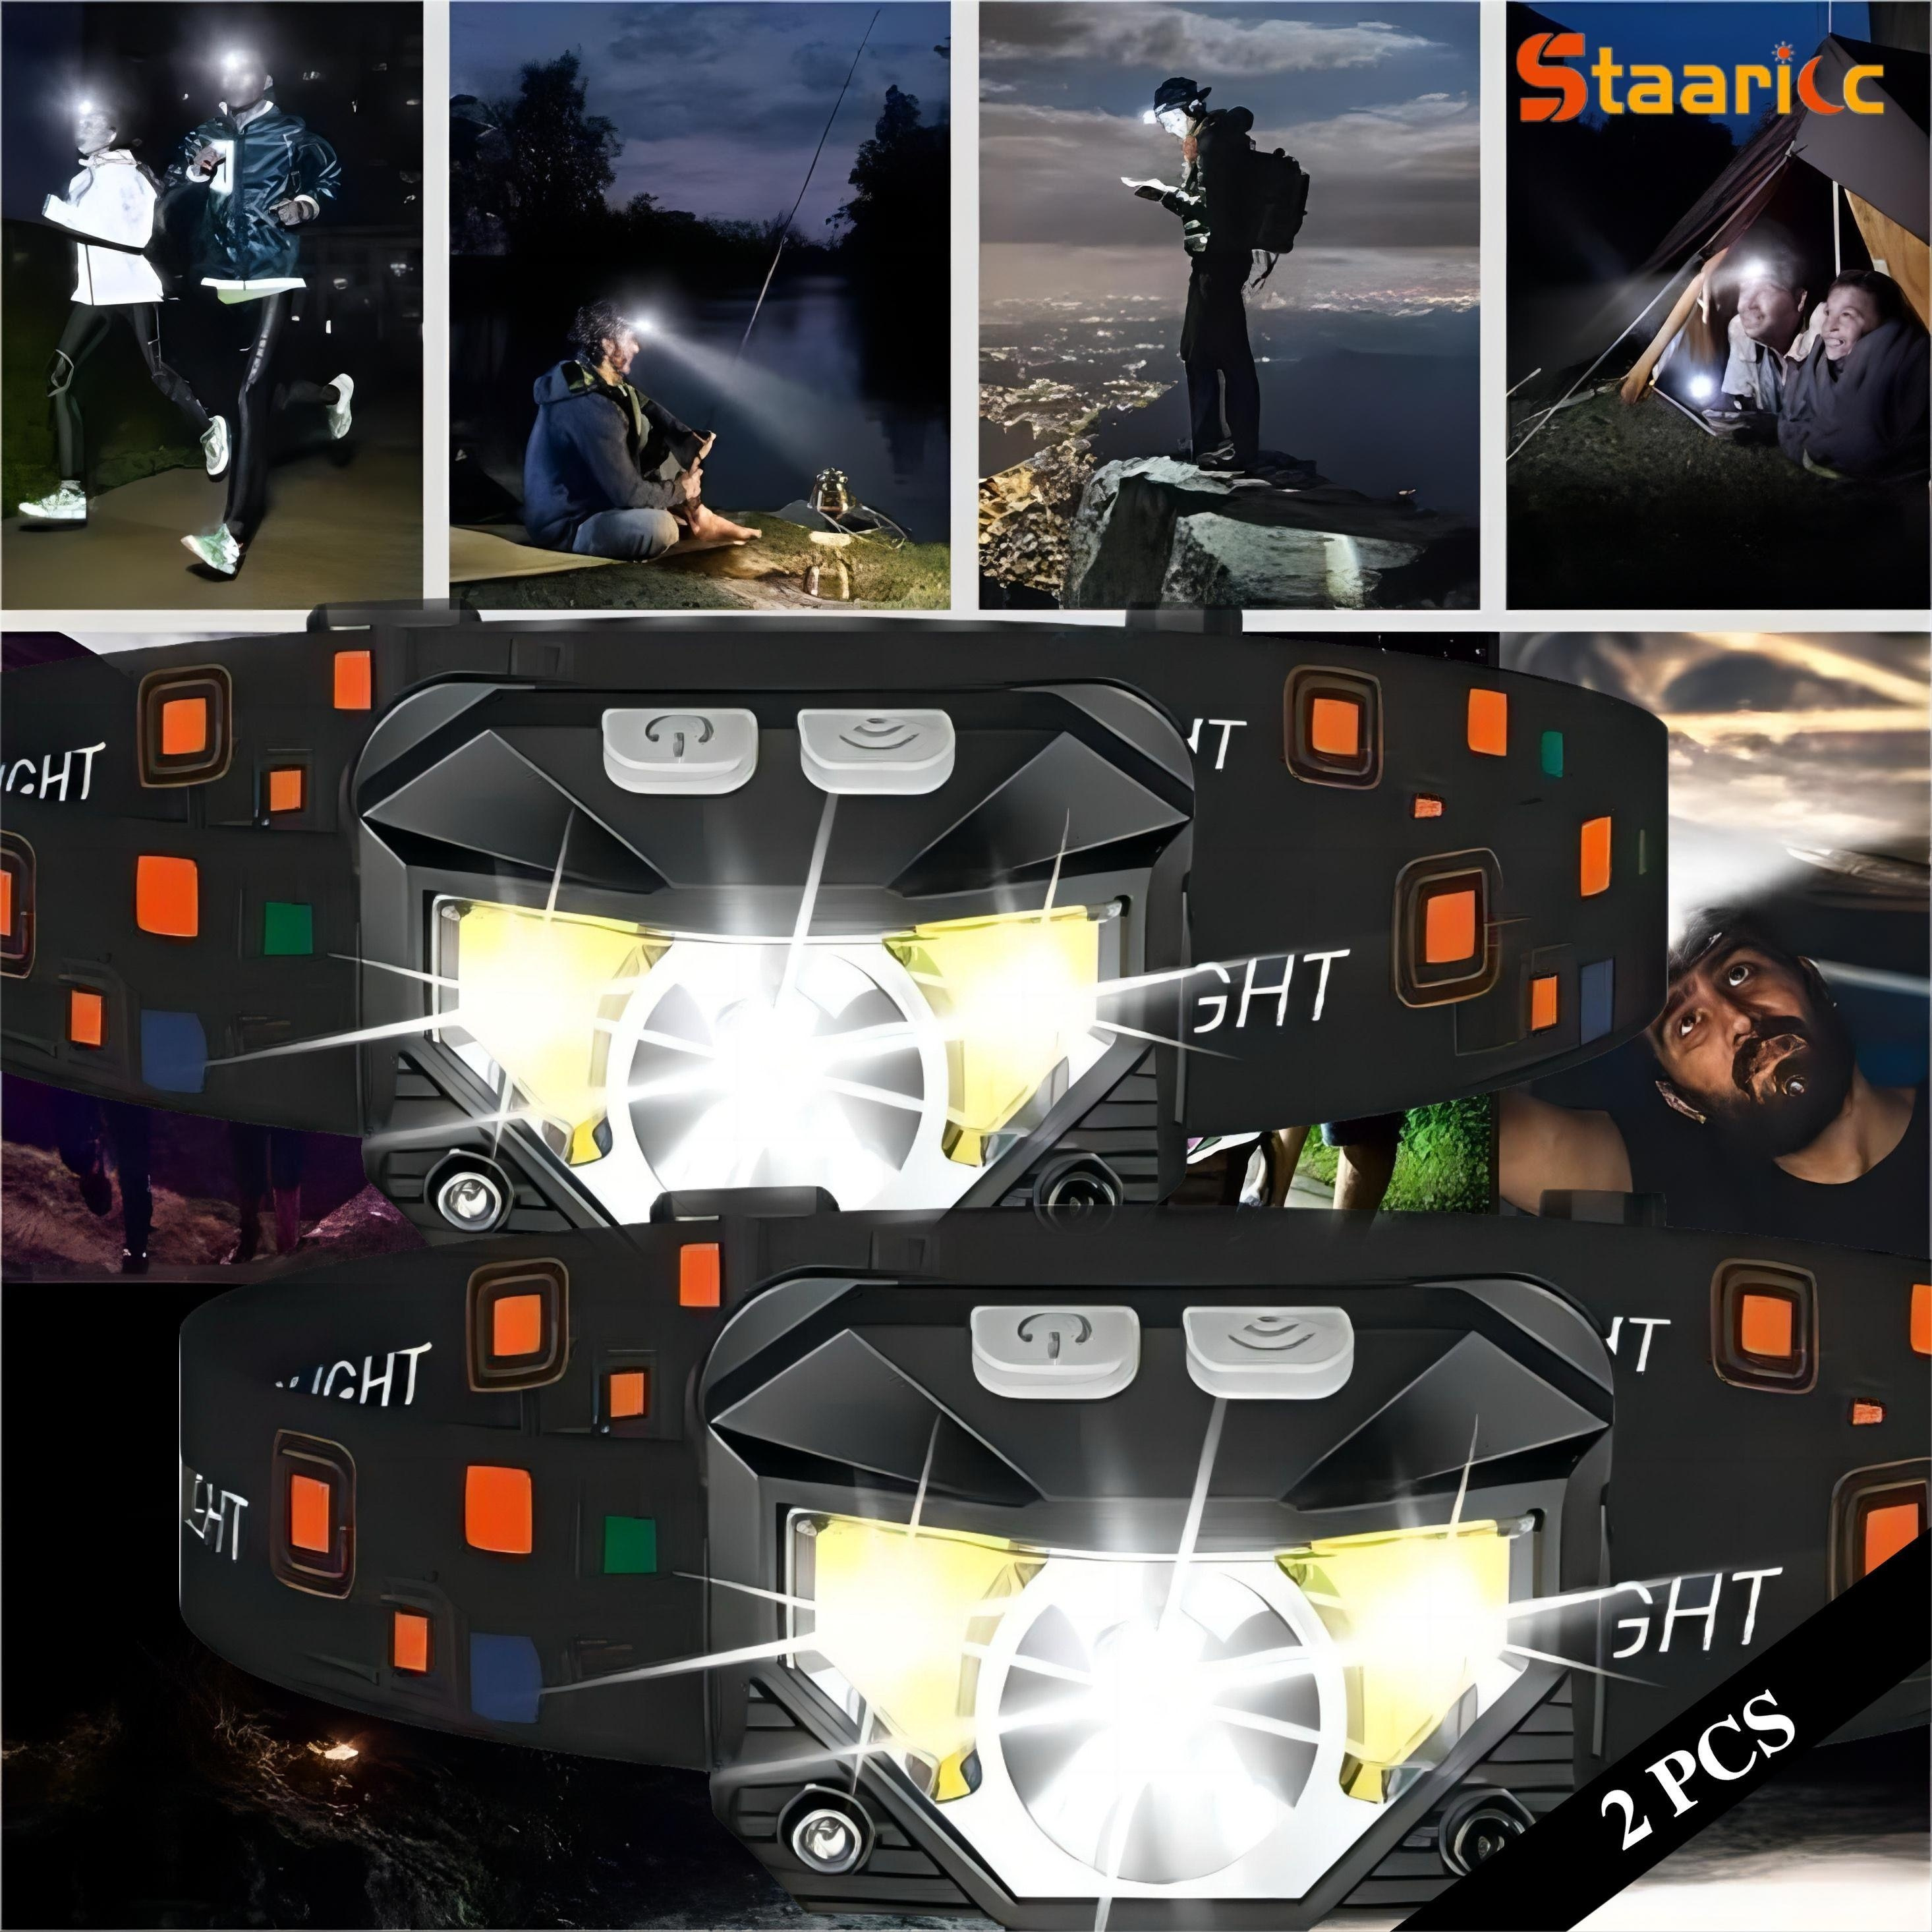 

Staaricc 2 Packs 1200 Lumens Ultra Bright Led Rechargeable Headlight, With Red And White Light Motion Sensor, 8 Lighting Modes For Outdoor Camping, Running, Fishing, Emergency